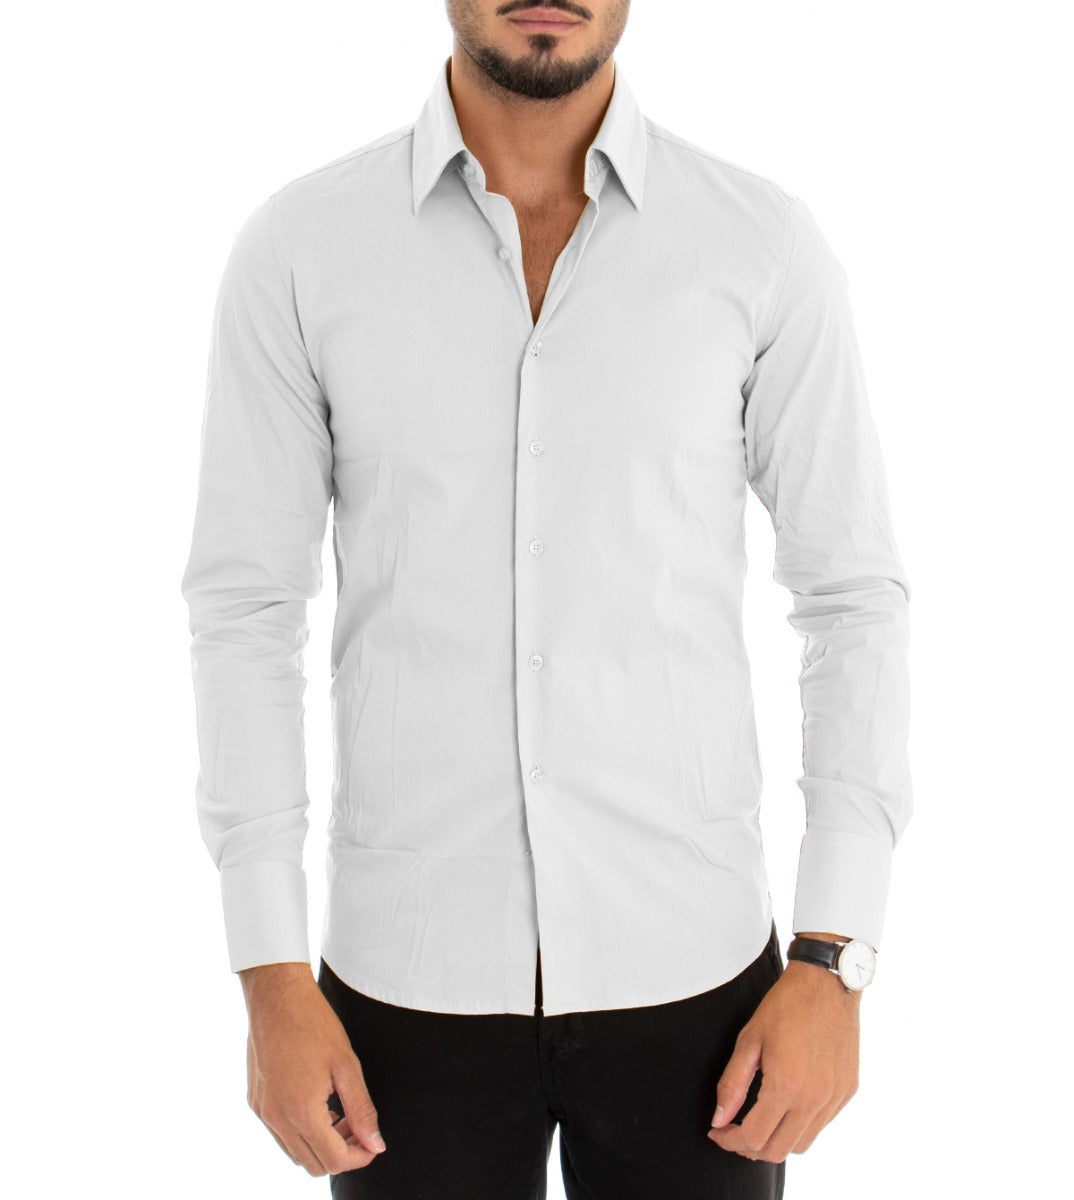 Men's Shirt With Collar Long Sleeve Slim Fit Basic Casual White Cotton GIOSAL-C1811A